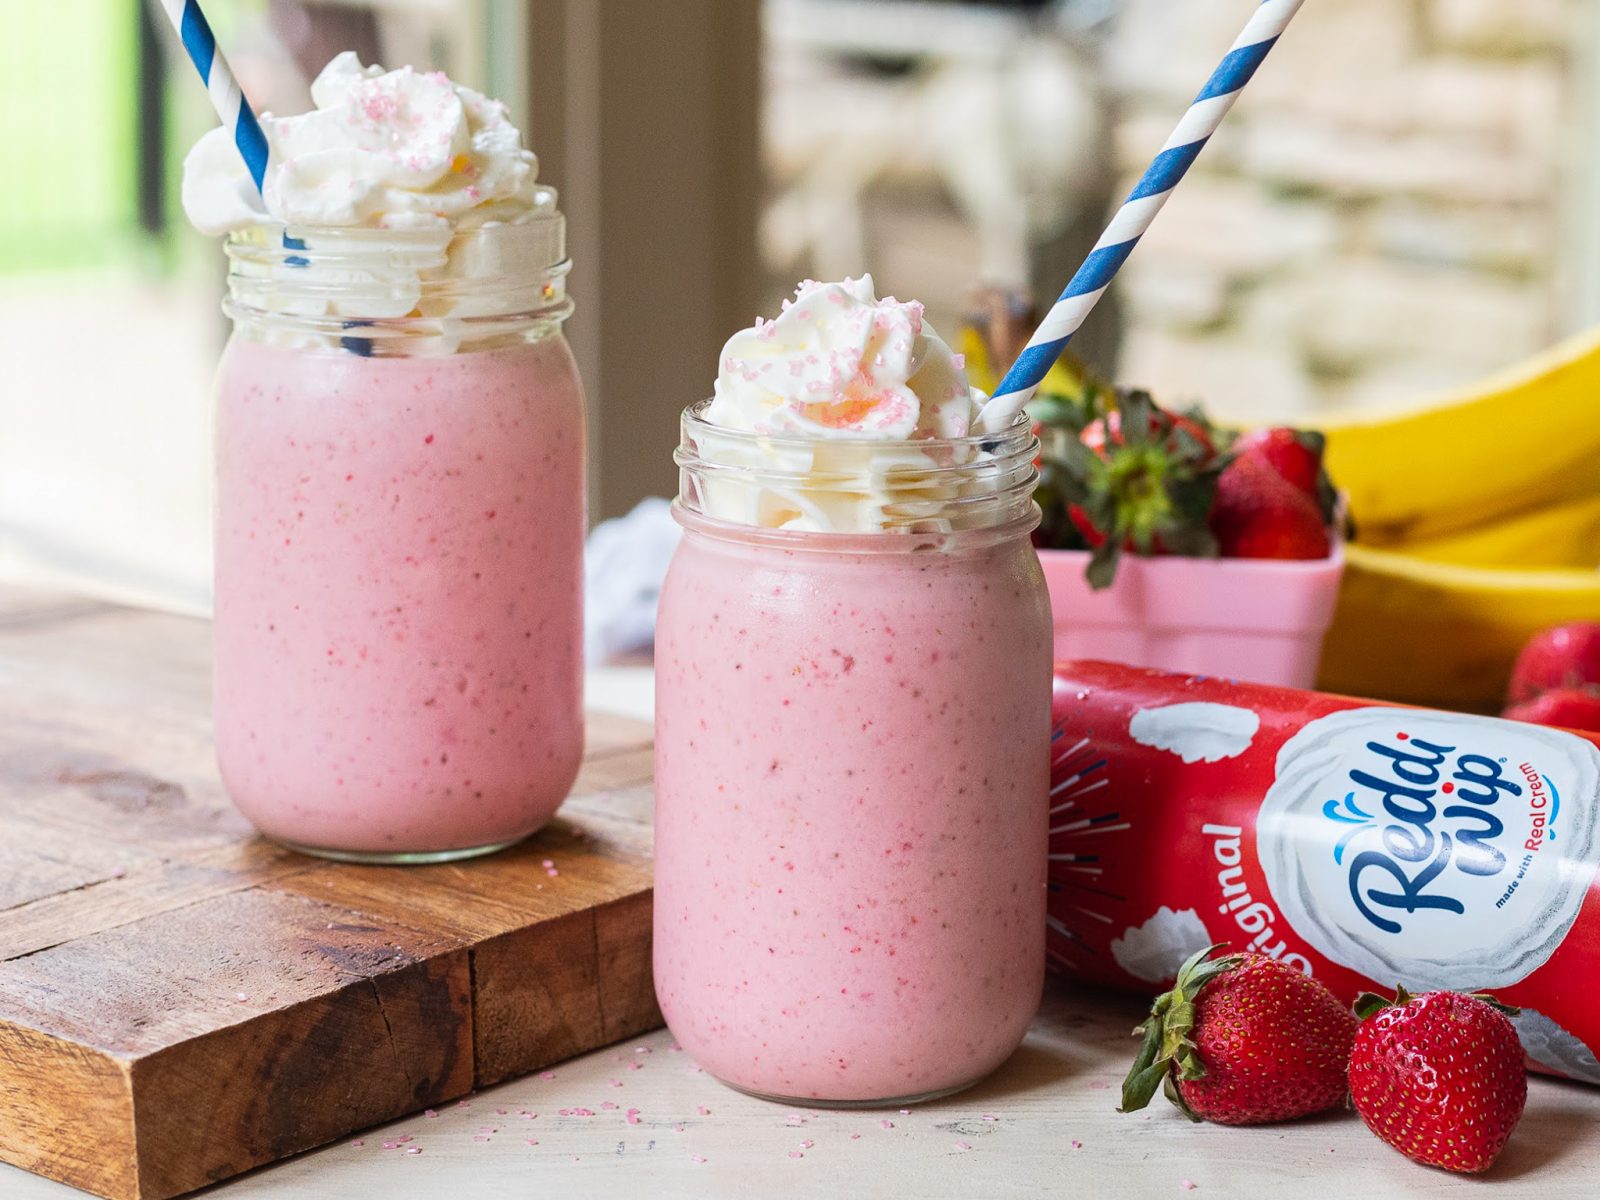 Make A Super Easy Strawberry Banana Smoothie + Stock Your Pantry & Save At Publix!